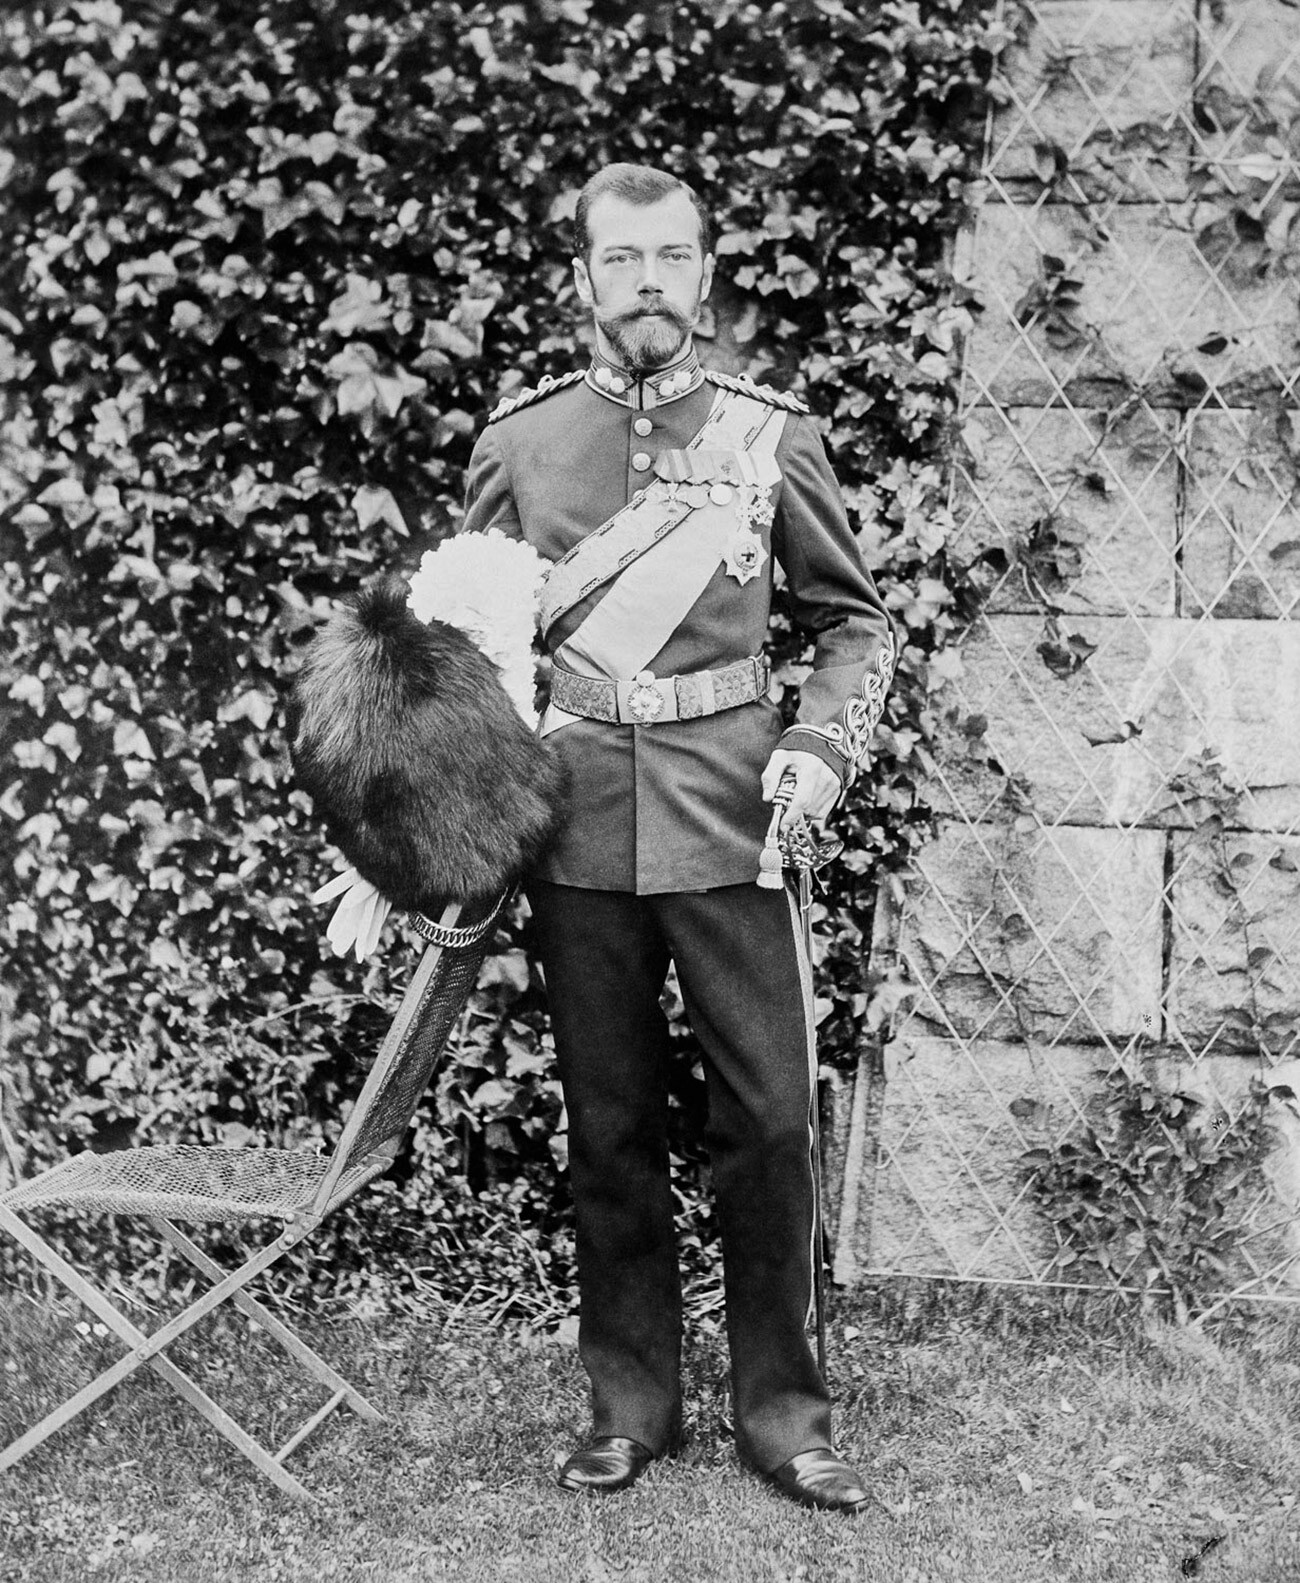  Photograph of Nicholas II, Emperor of Russia standing outside Balmoral. He is wearing British military uniform and is holding a bearskin hat in his right hand and a sword in his left. 